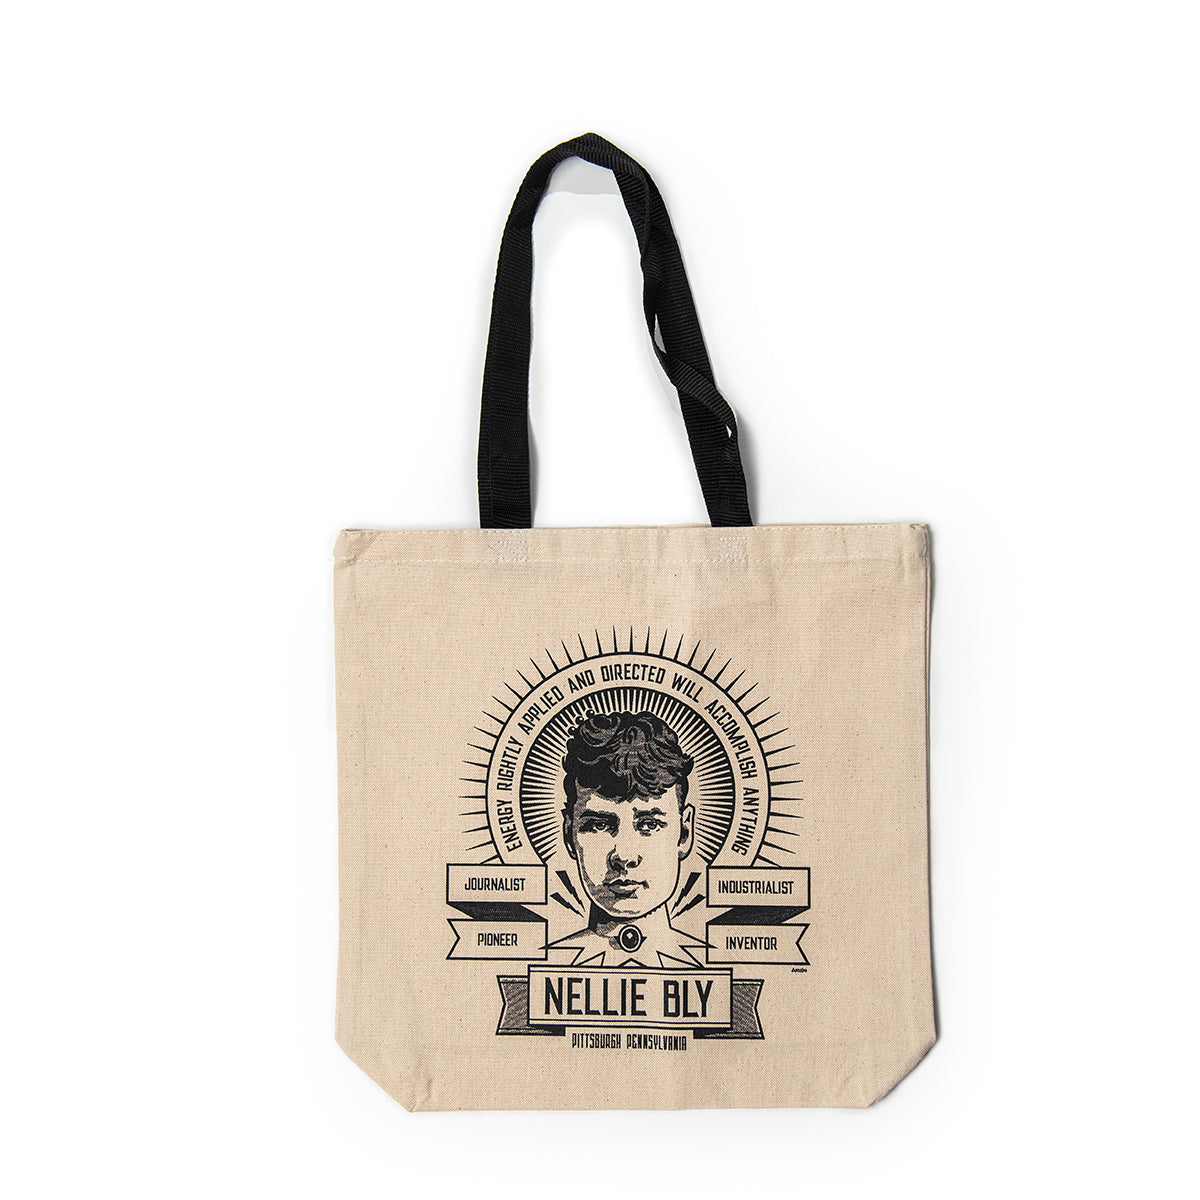 Nellie Bly Tote Bag